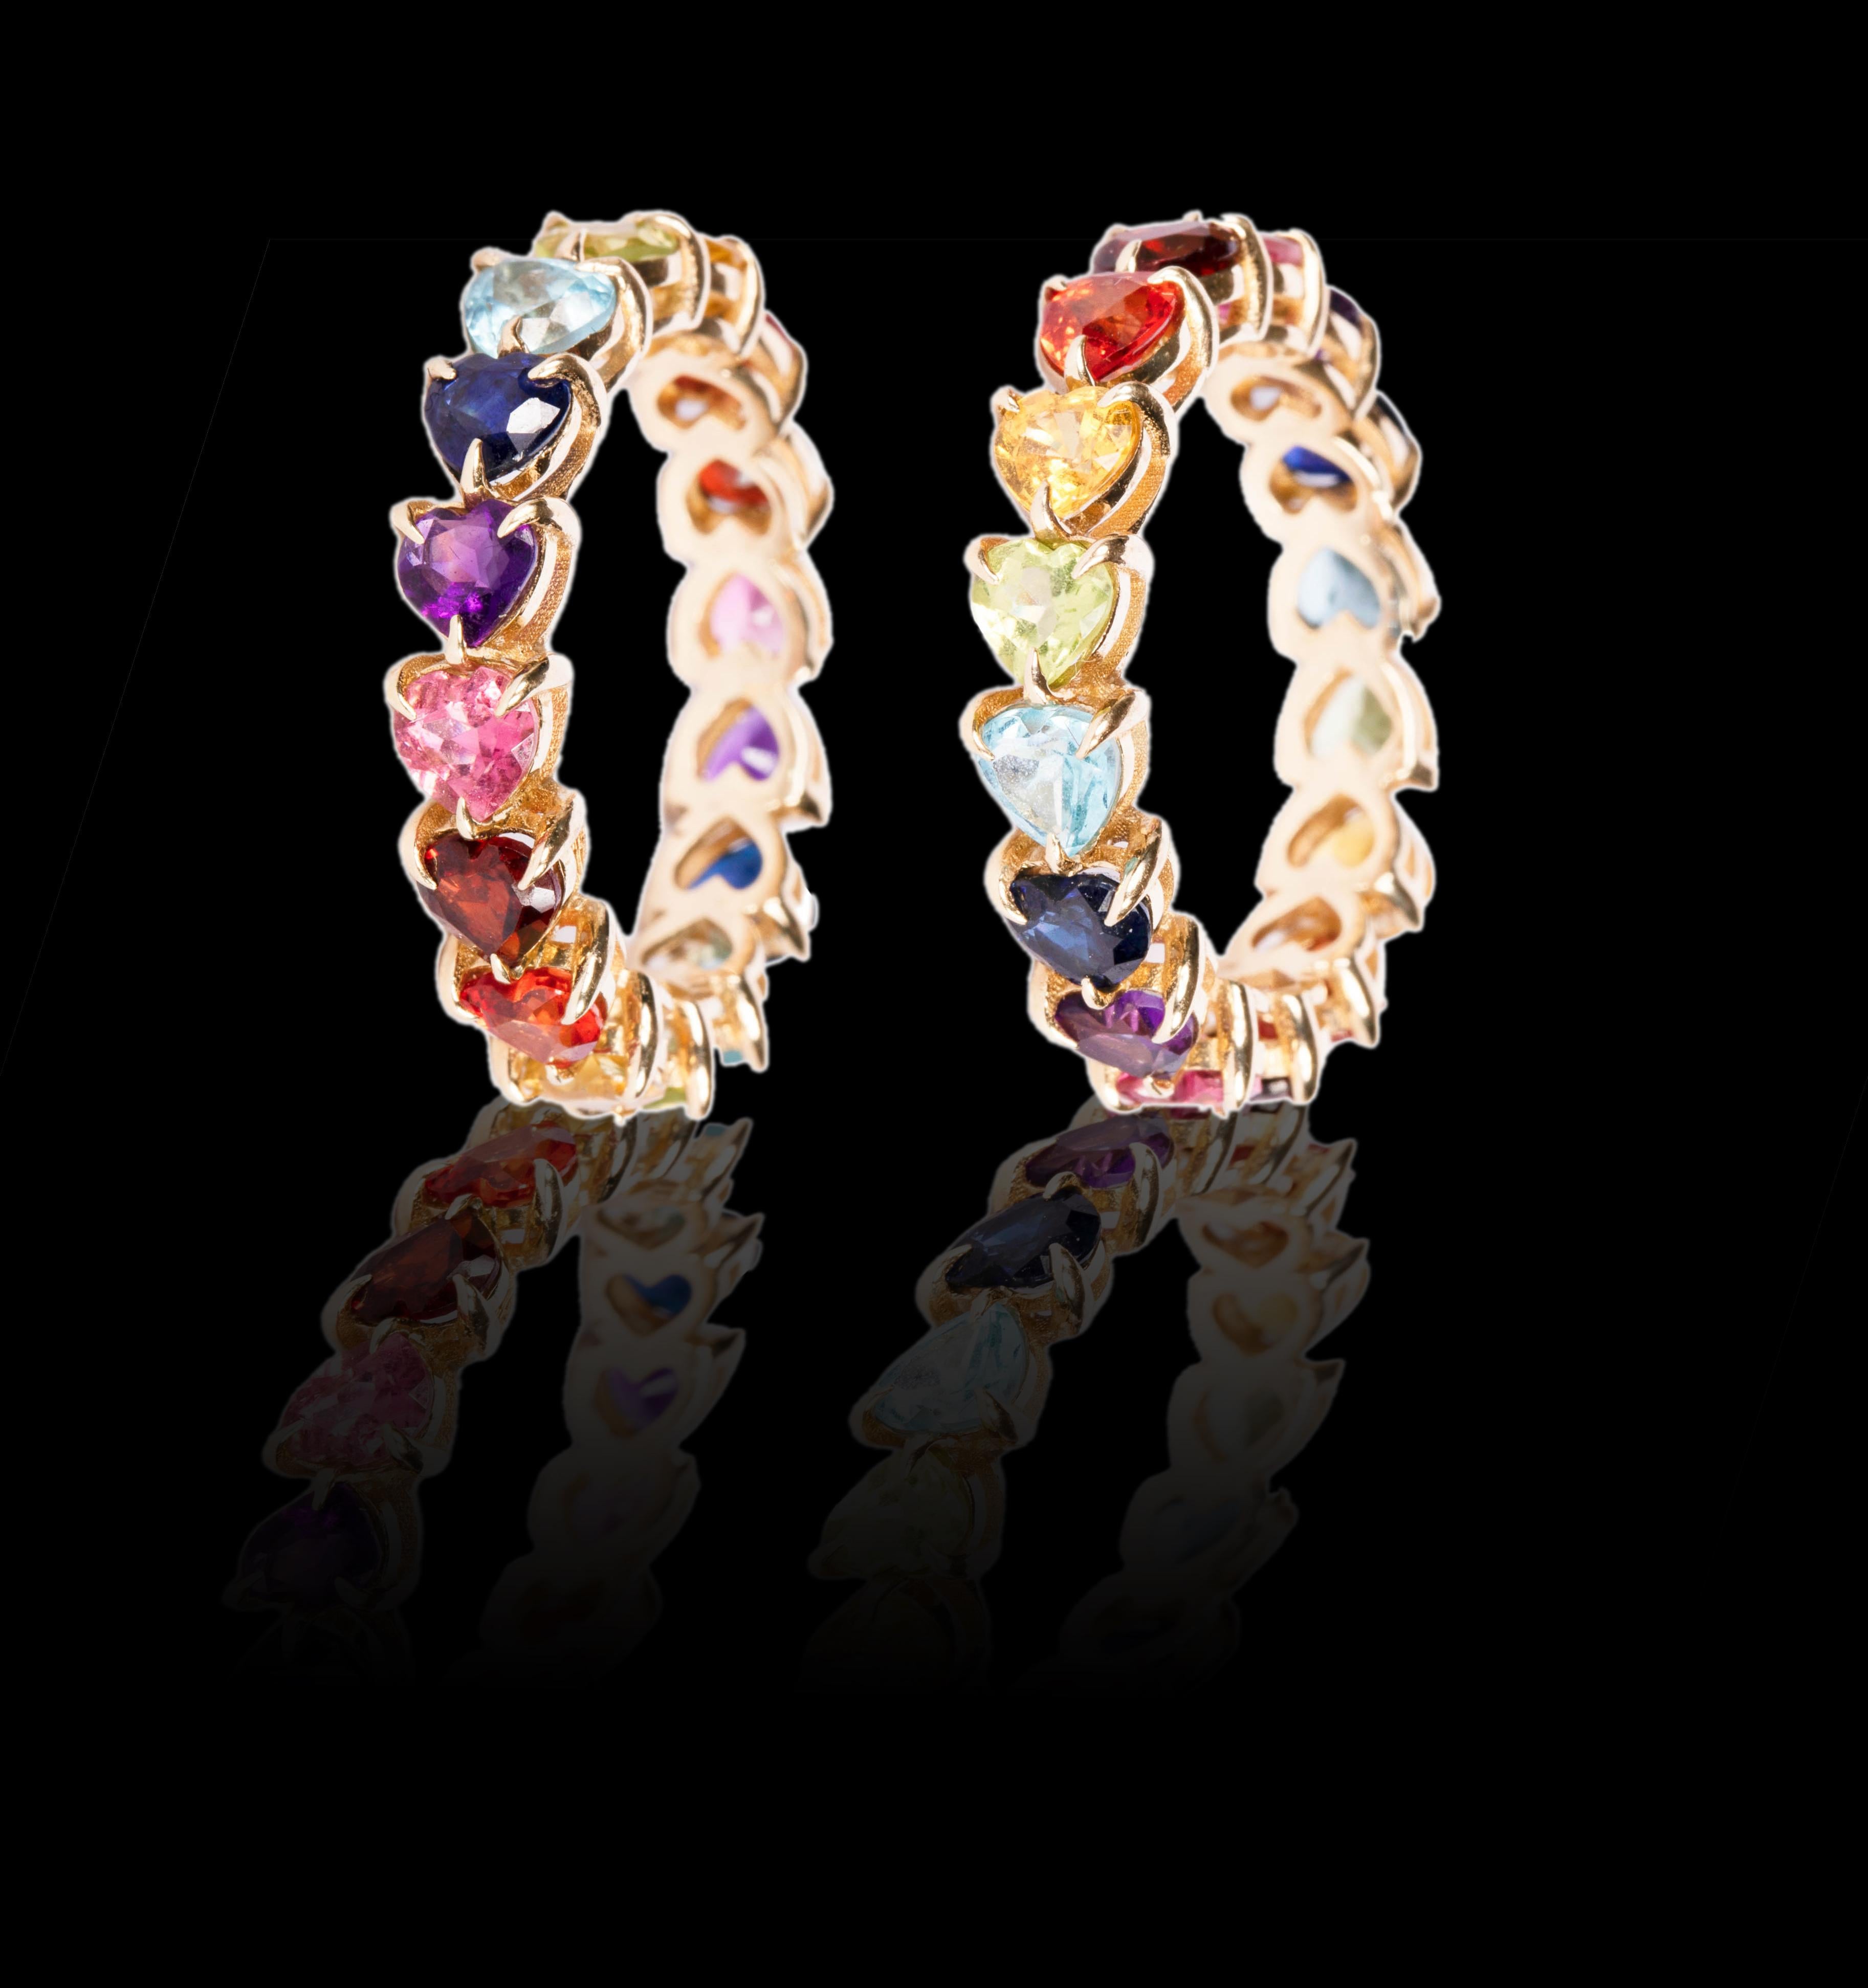 As the first fine jewelry piece from the house of Mordekai, we are celebrating one of our iconic themes, the Rainbow! This unique ring is made of 14k gold, and hand-set with the finest hand-selected, colored stones and gems sourced from all over the